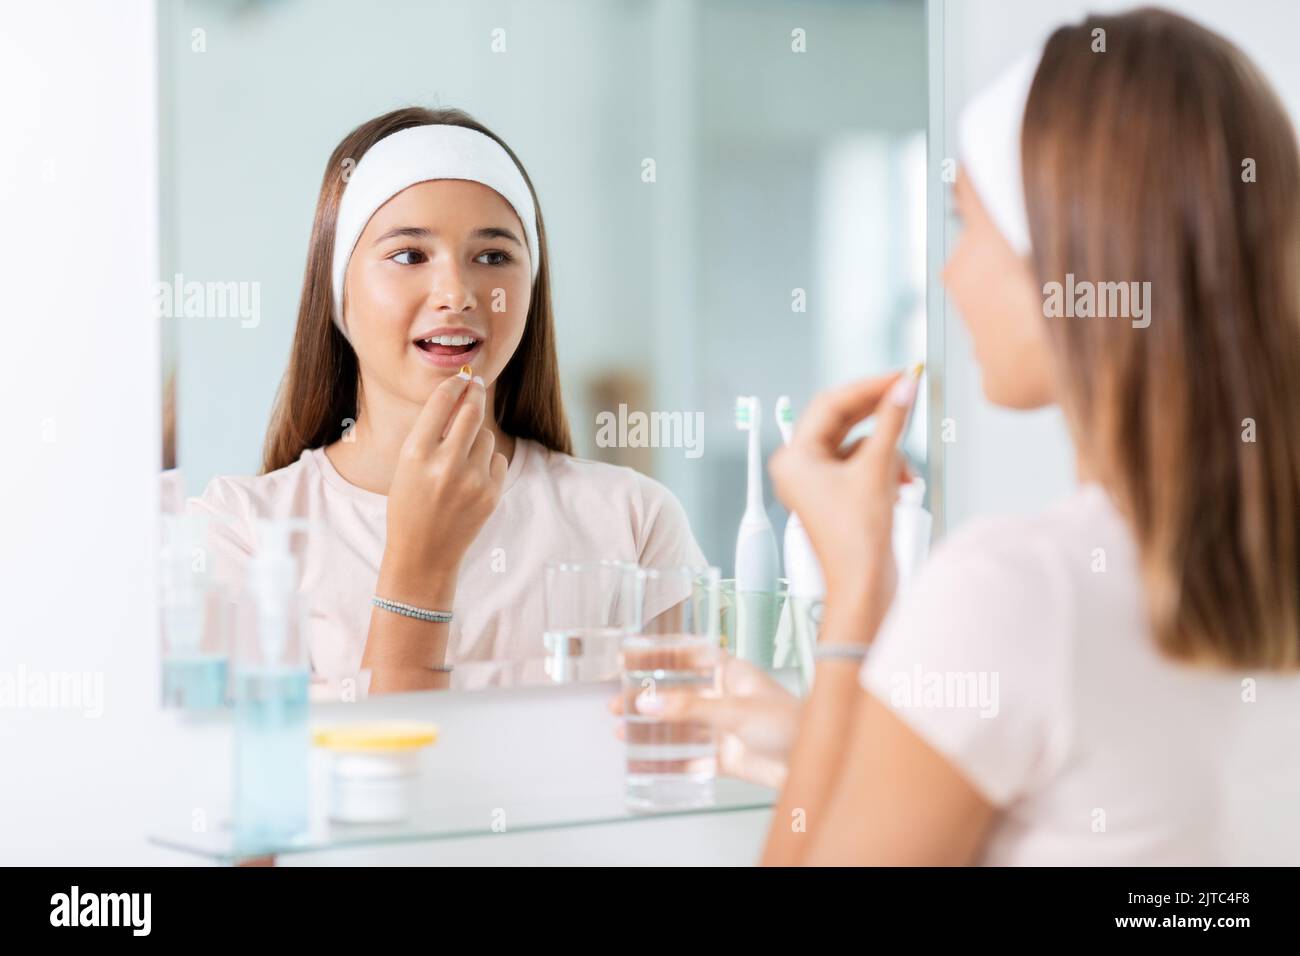 teenage girl taking cod liver oil at mirror Stock Photo